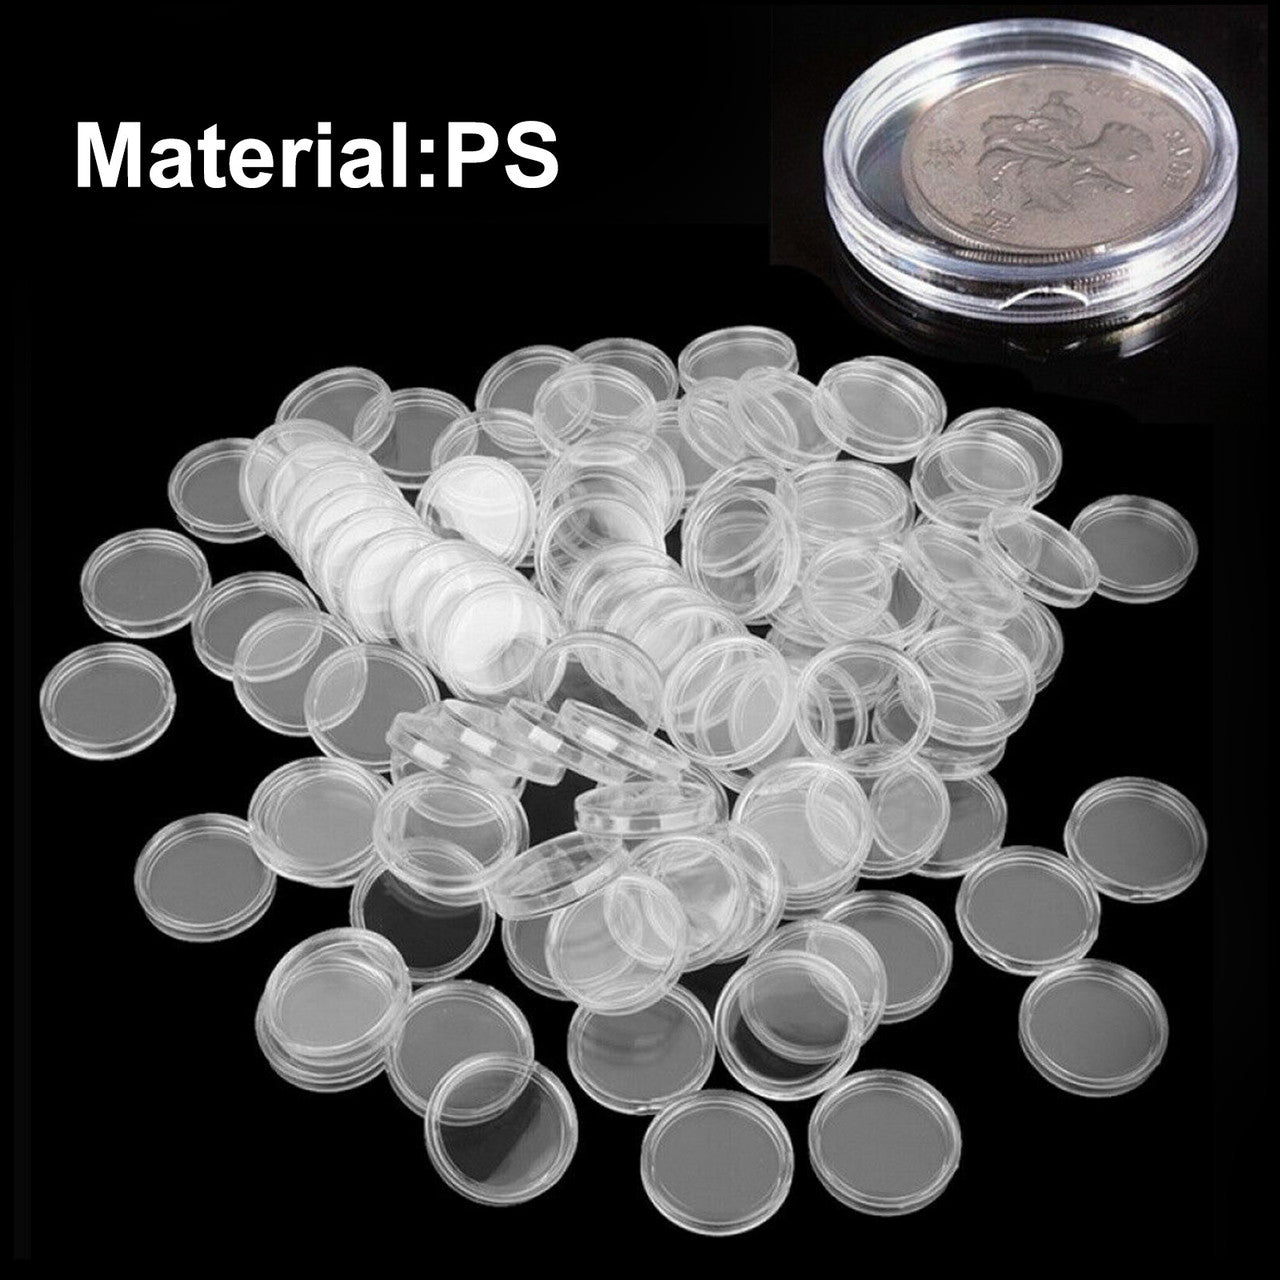 24mm Coin Capsules Protect Holder Case, Clear Plastic Coin Storage Organizer Box for Coin Collection Supplies Accessories, 100Pcs